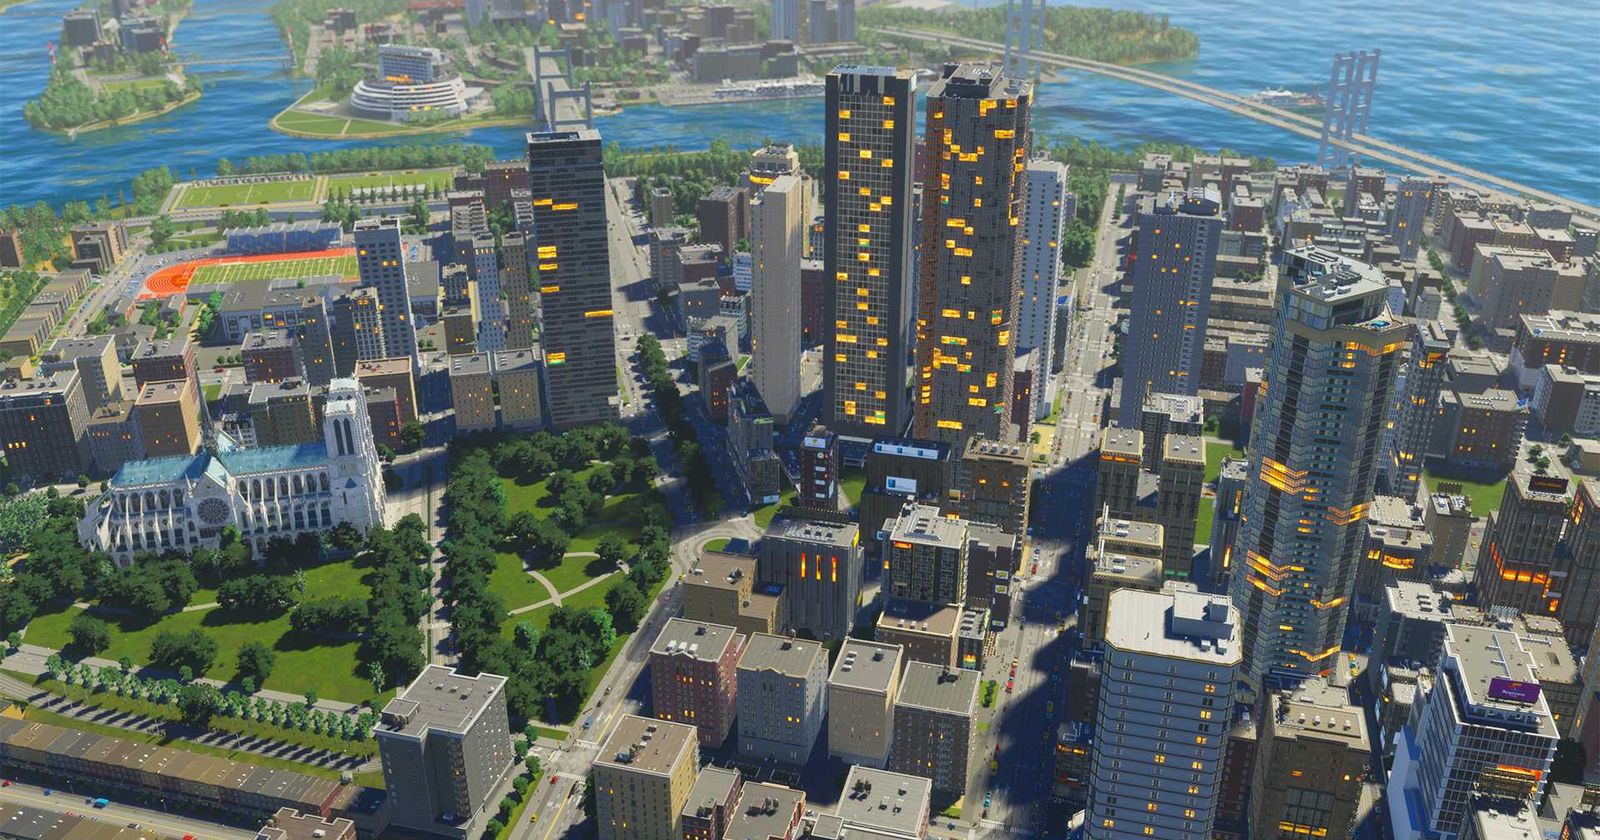 Is Cities: Skylines 2 Multiplayer? Answered